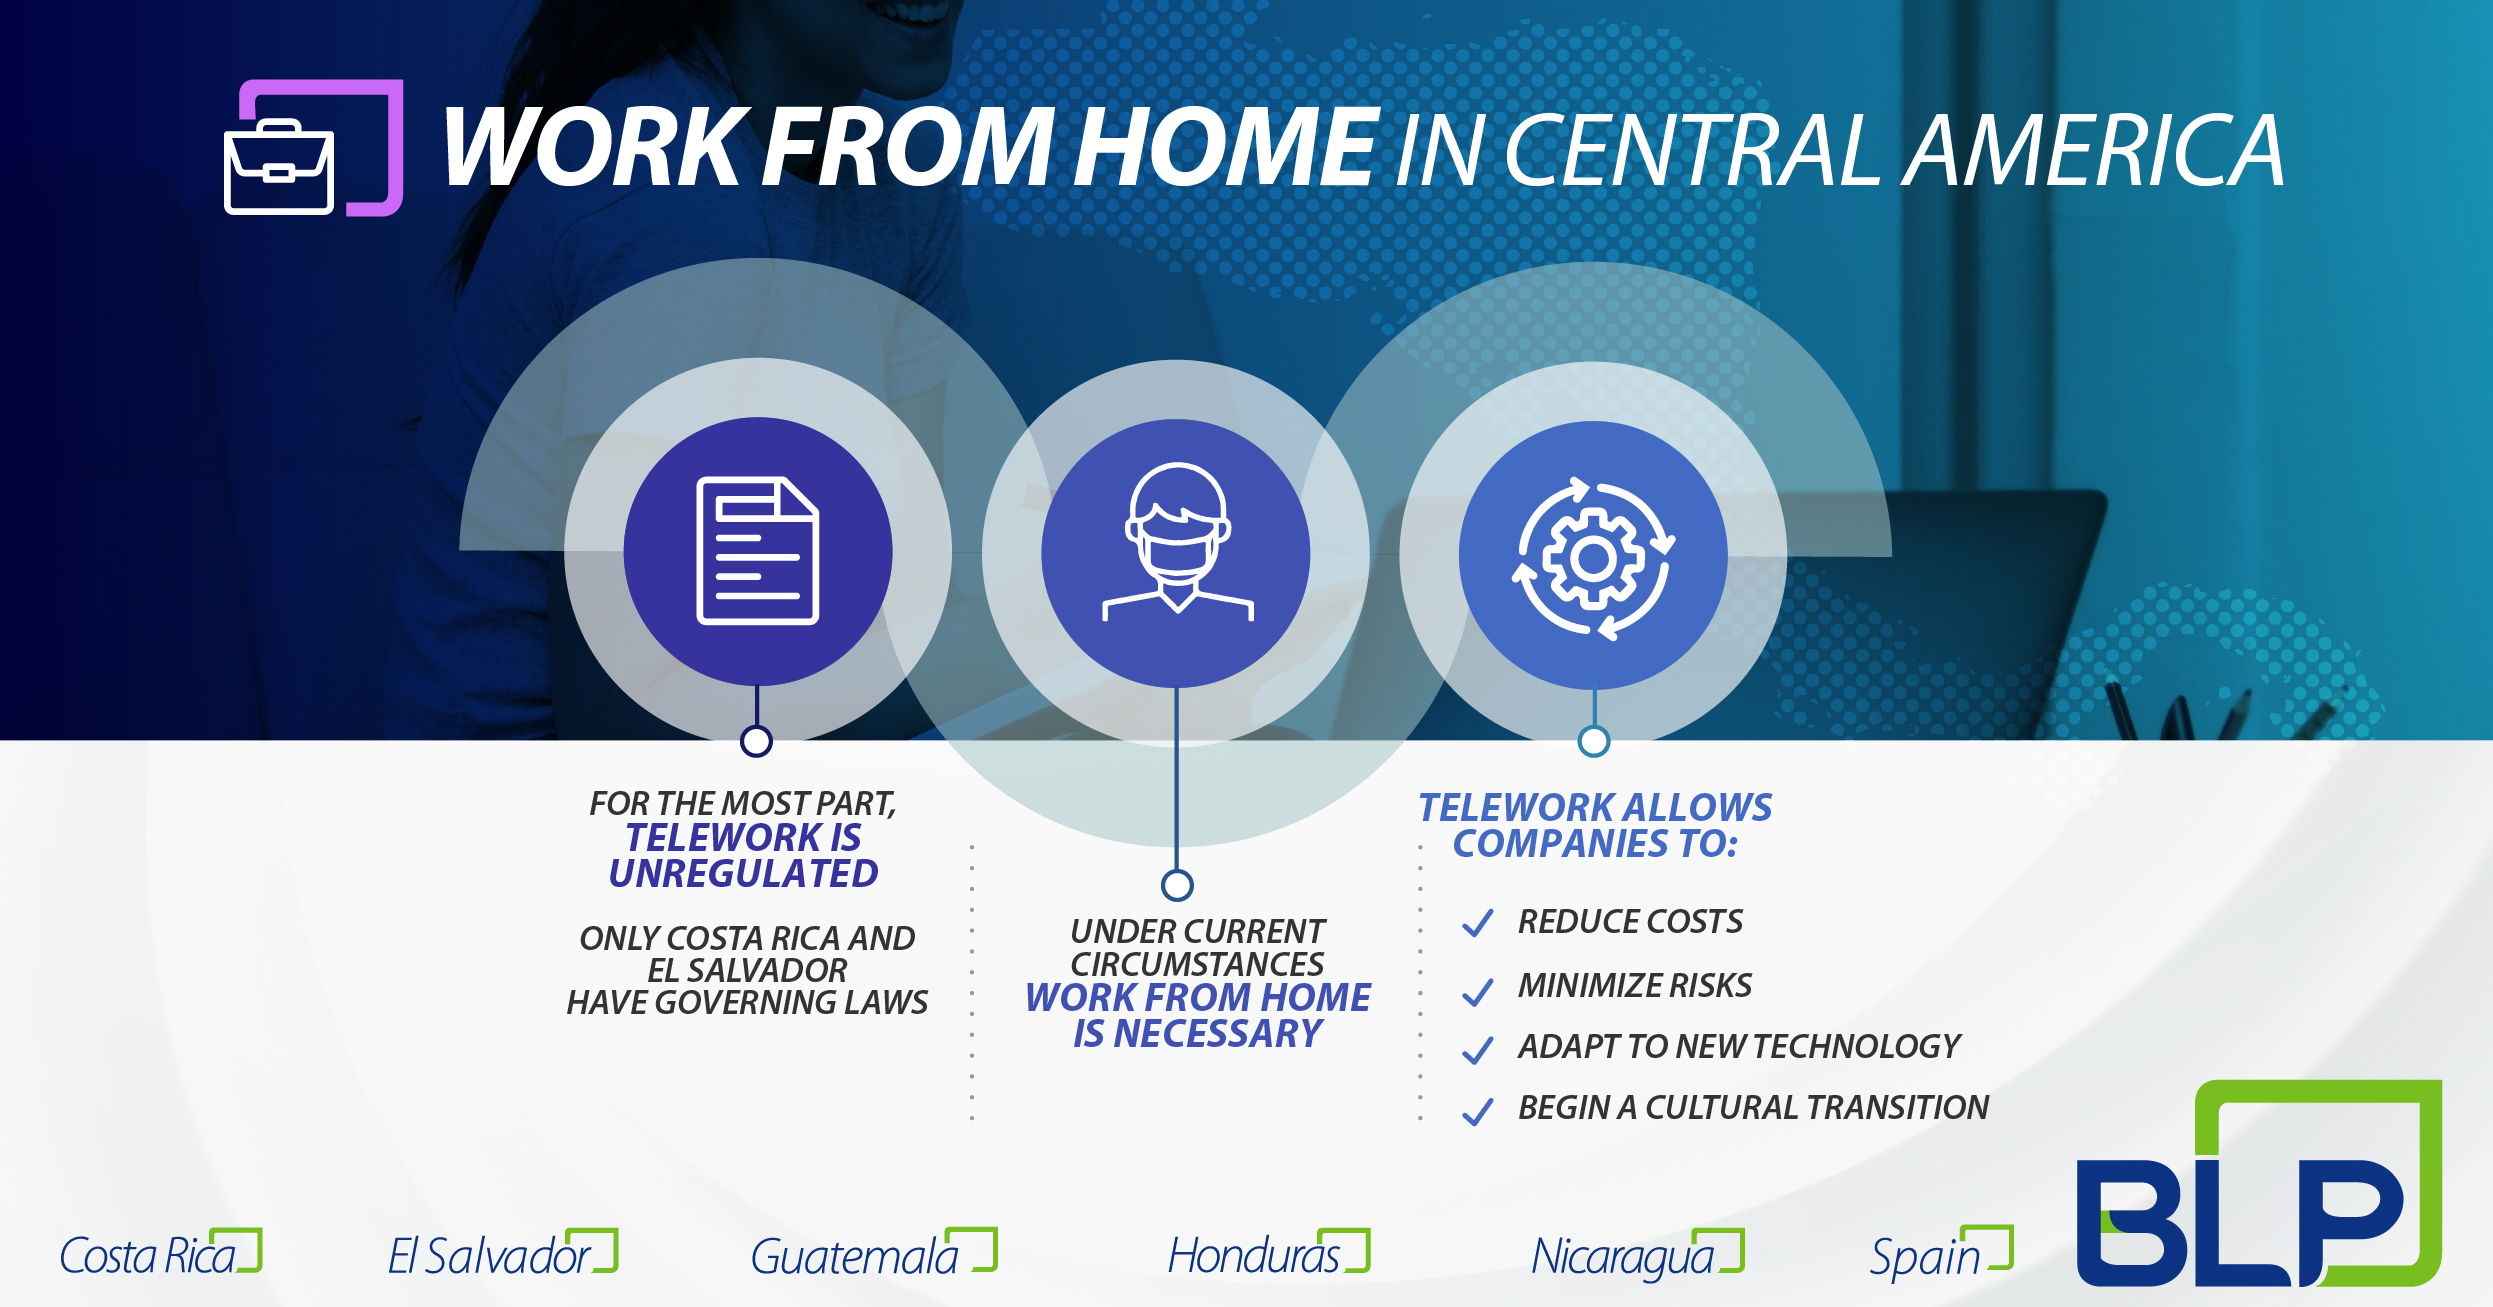 Work from home in Central America